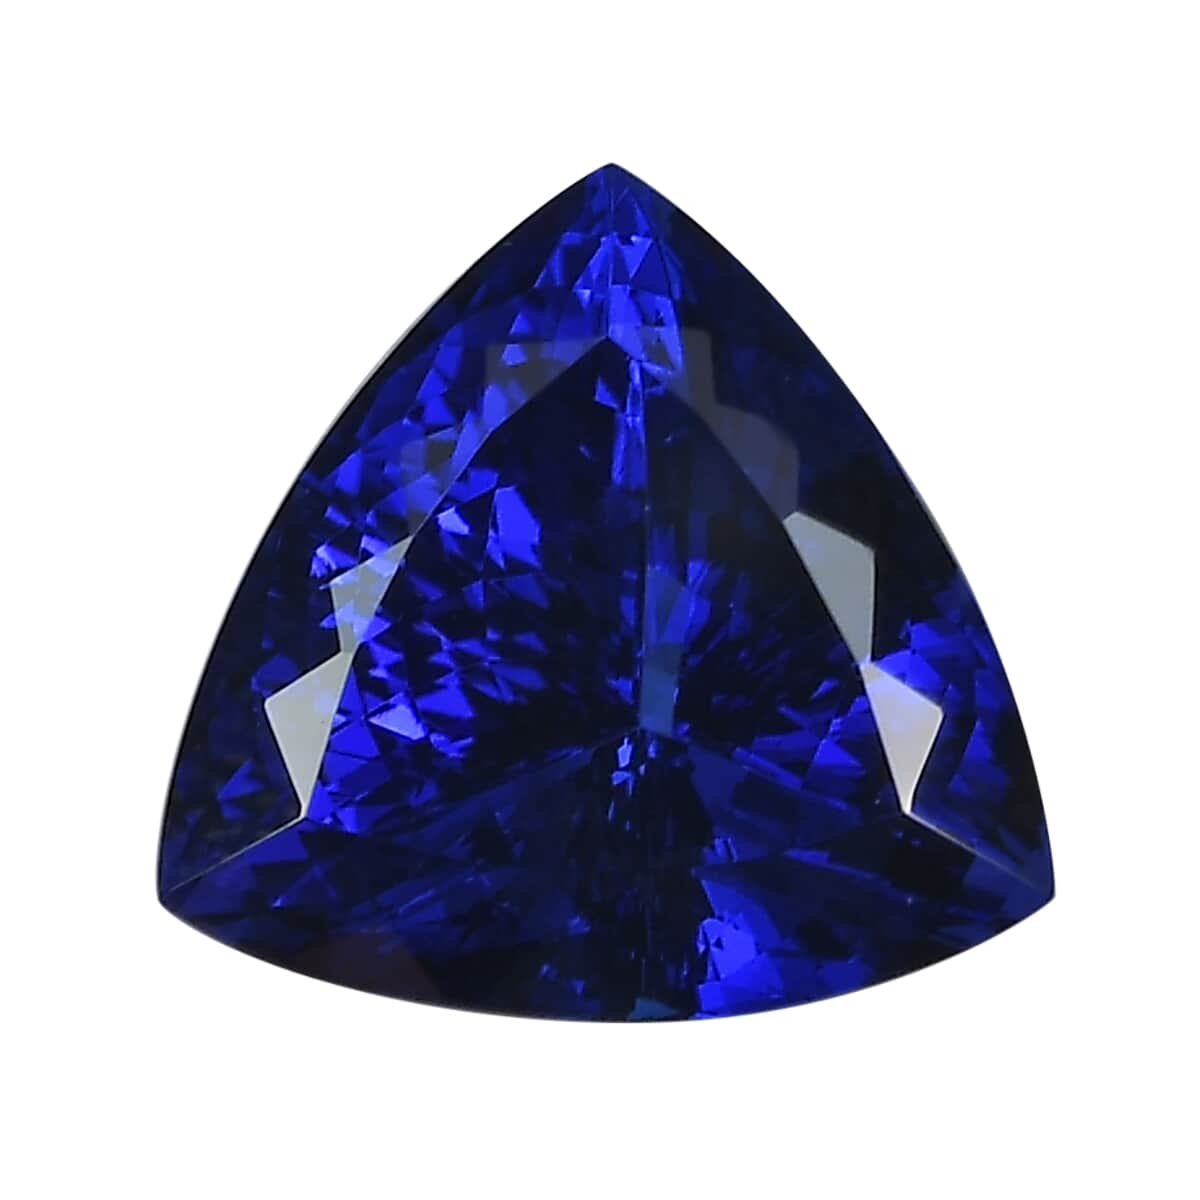 Certified and Appraised AAAA Vivid Tanzanite (Trl Free Size) 5.00 ctw, Loose Gemstone For Jewelry Making, Trillion Free Size Tanzanite Gem, Tanzanite Stone For Jewelry image number 0